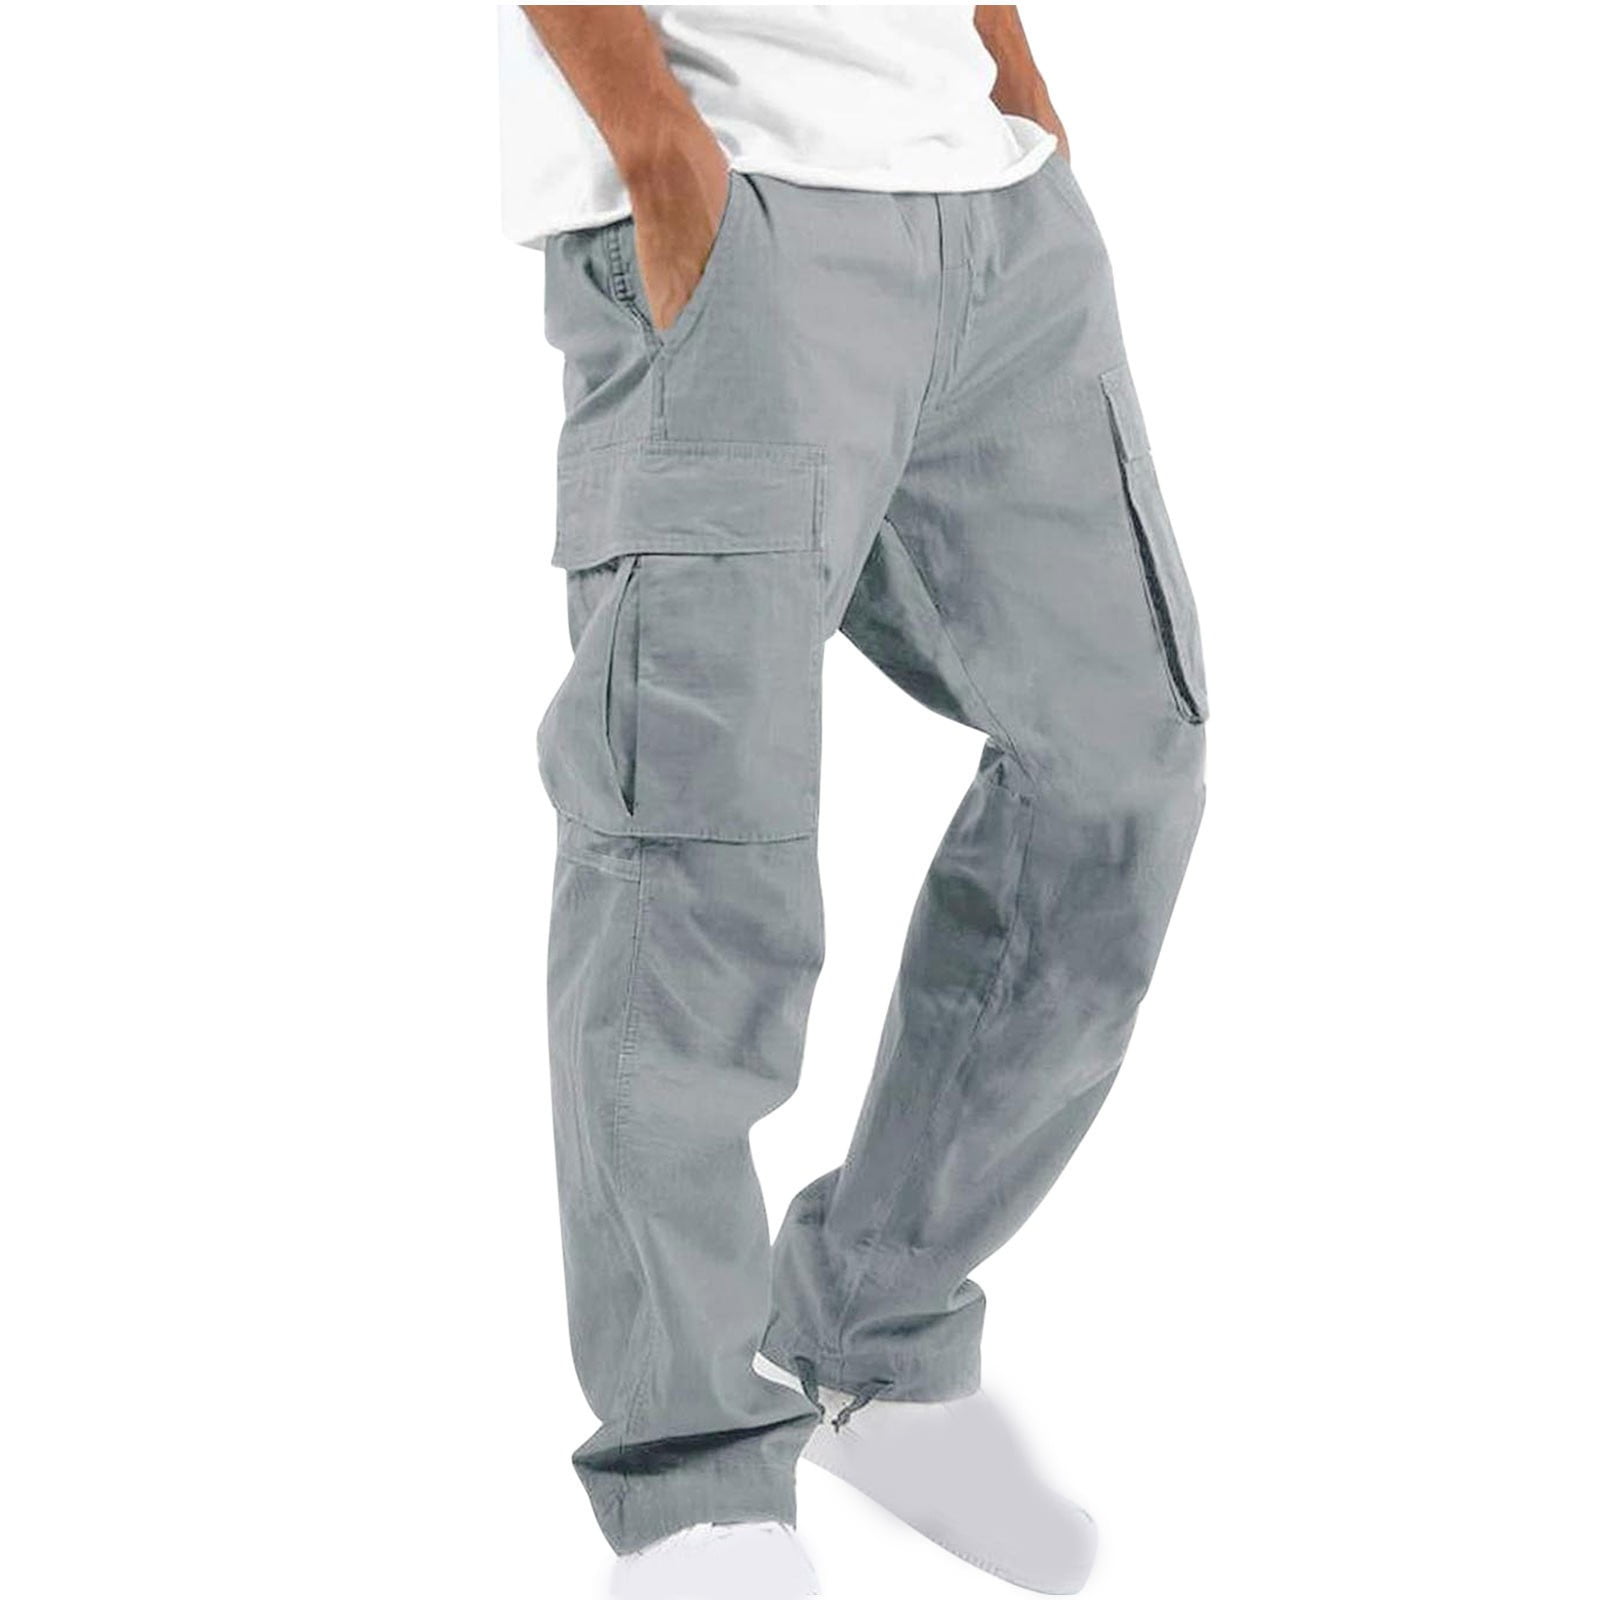 Cargo and Work Pants